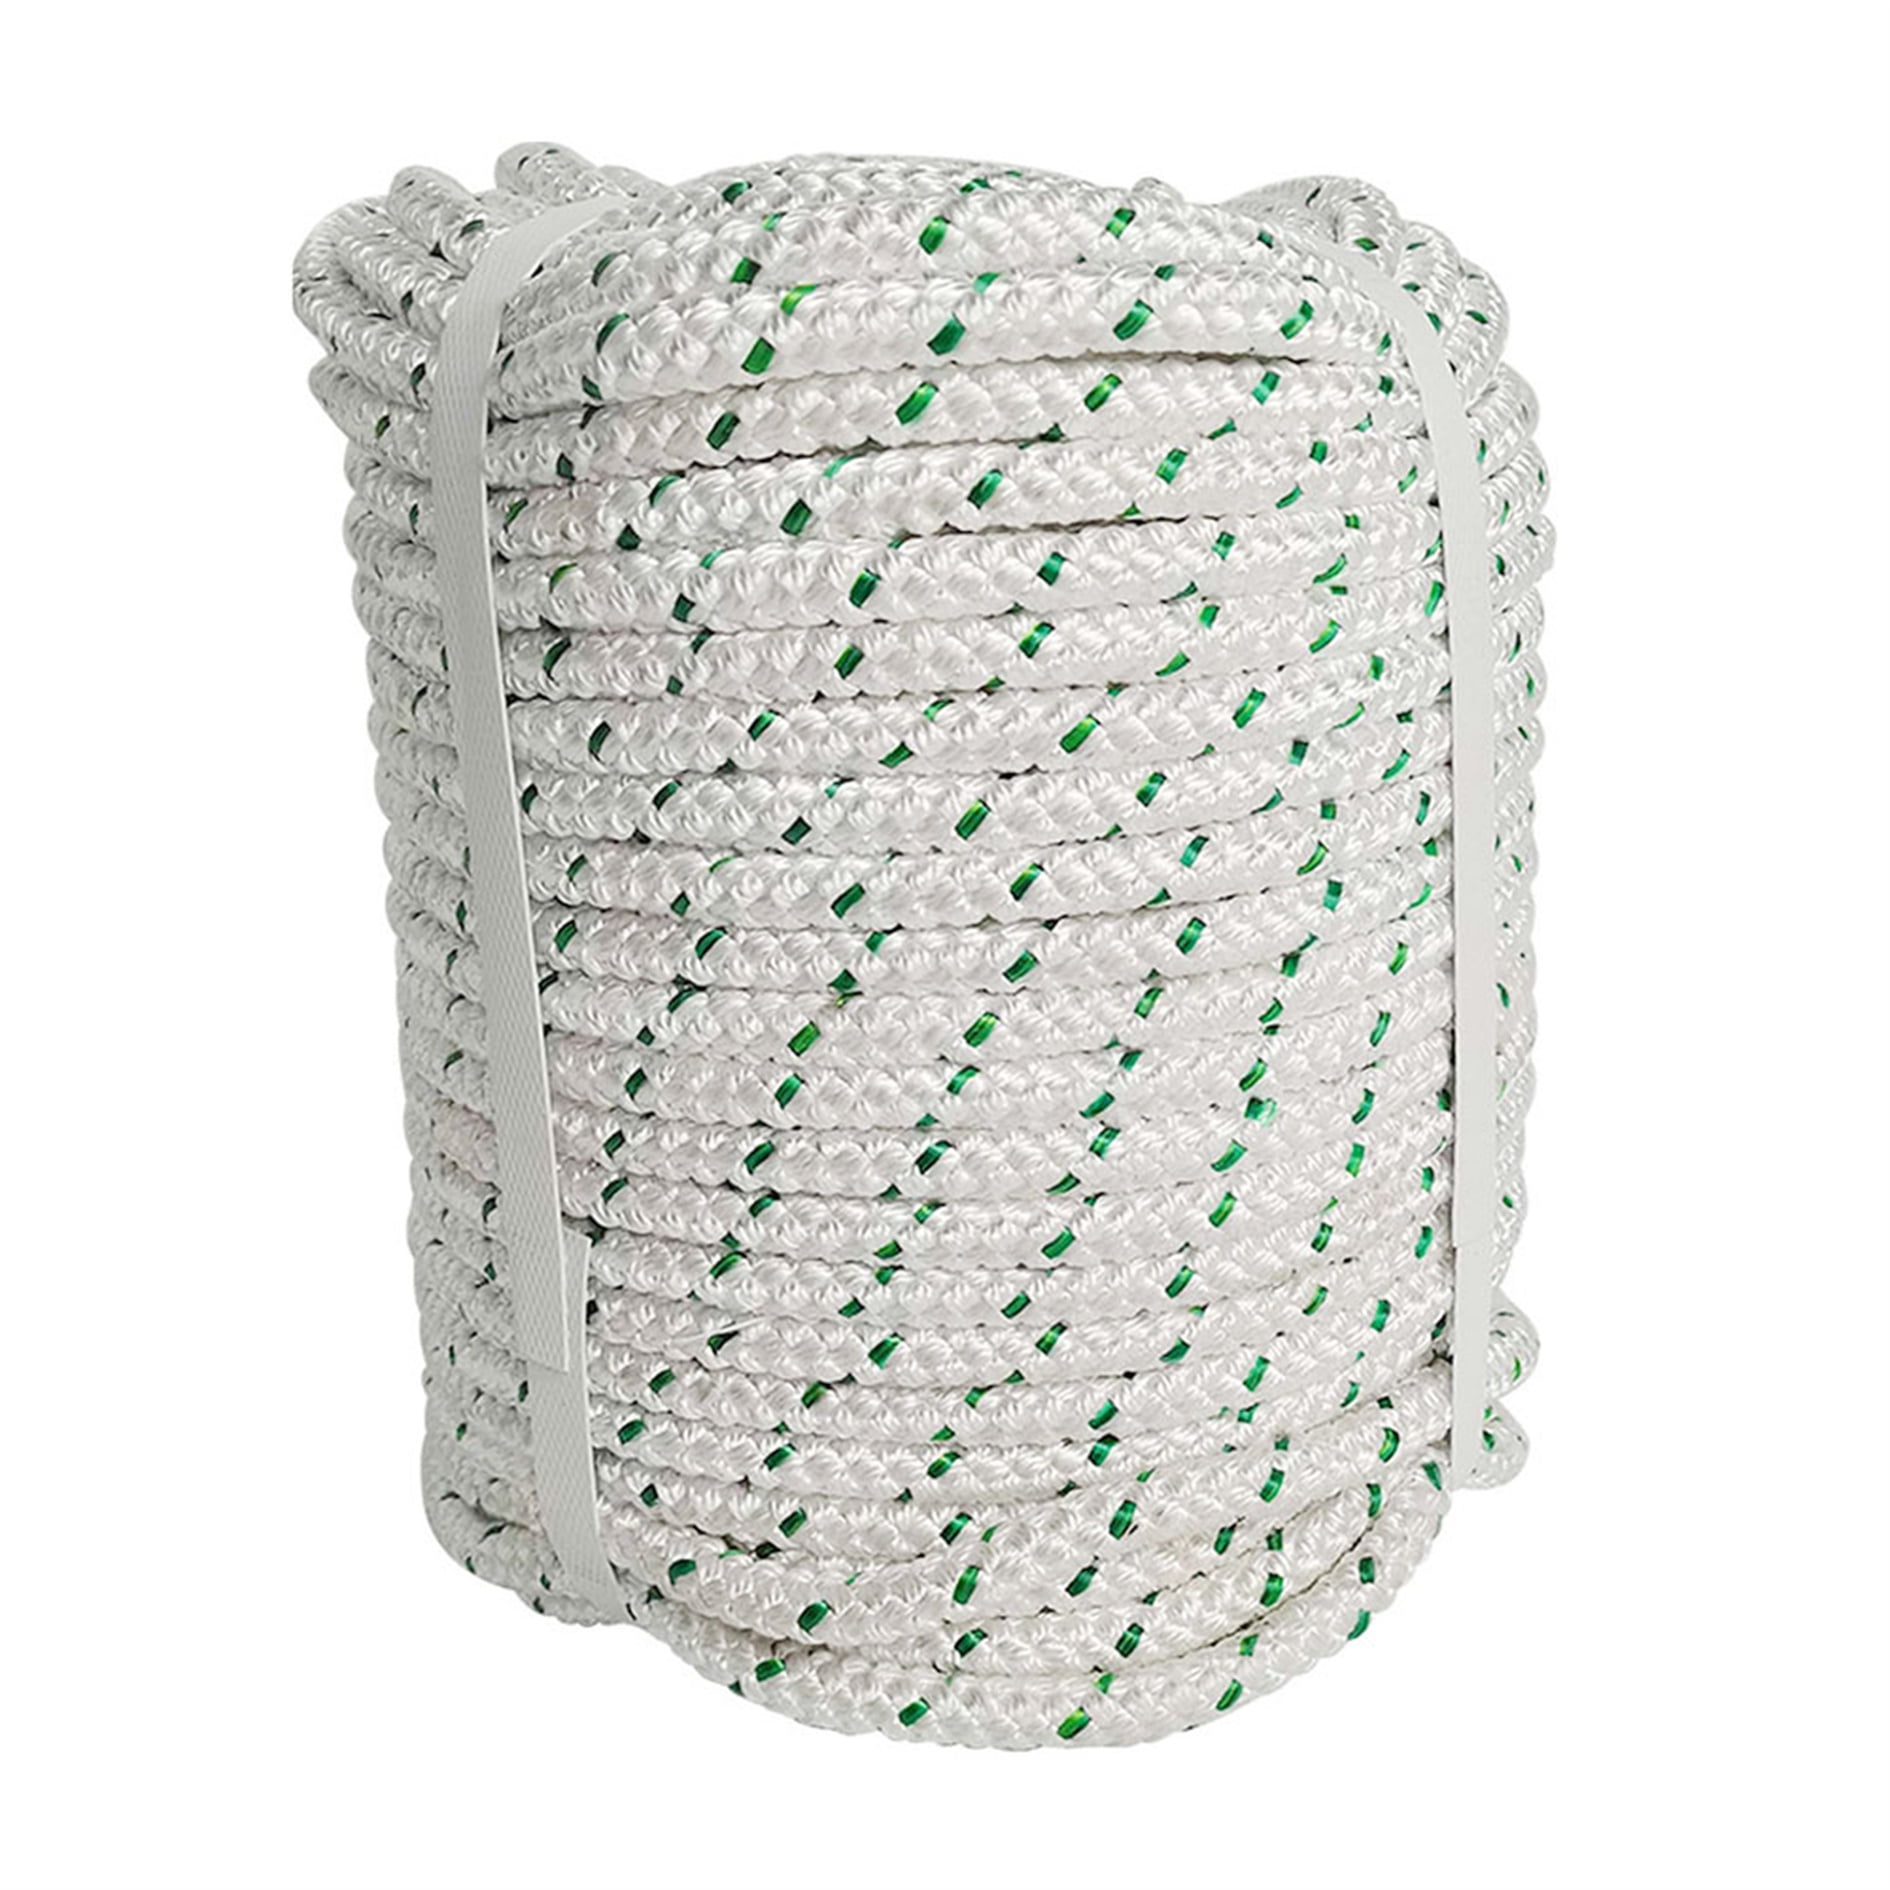 USA NEW 100FT Double Braid Polyester Rope 3/8 4800Lbs BREAKING STRENGTH US 